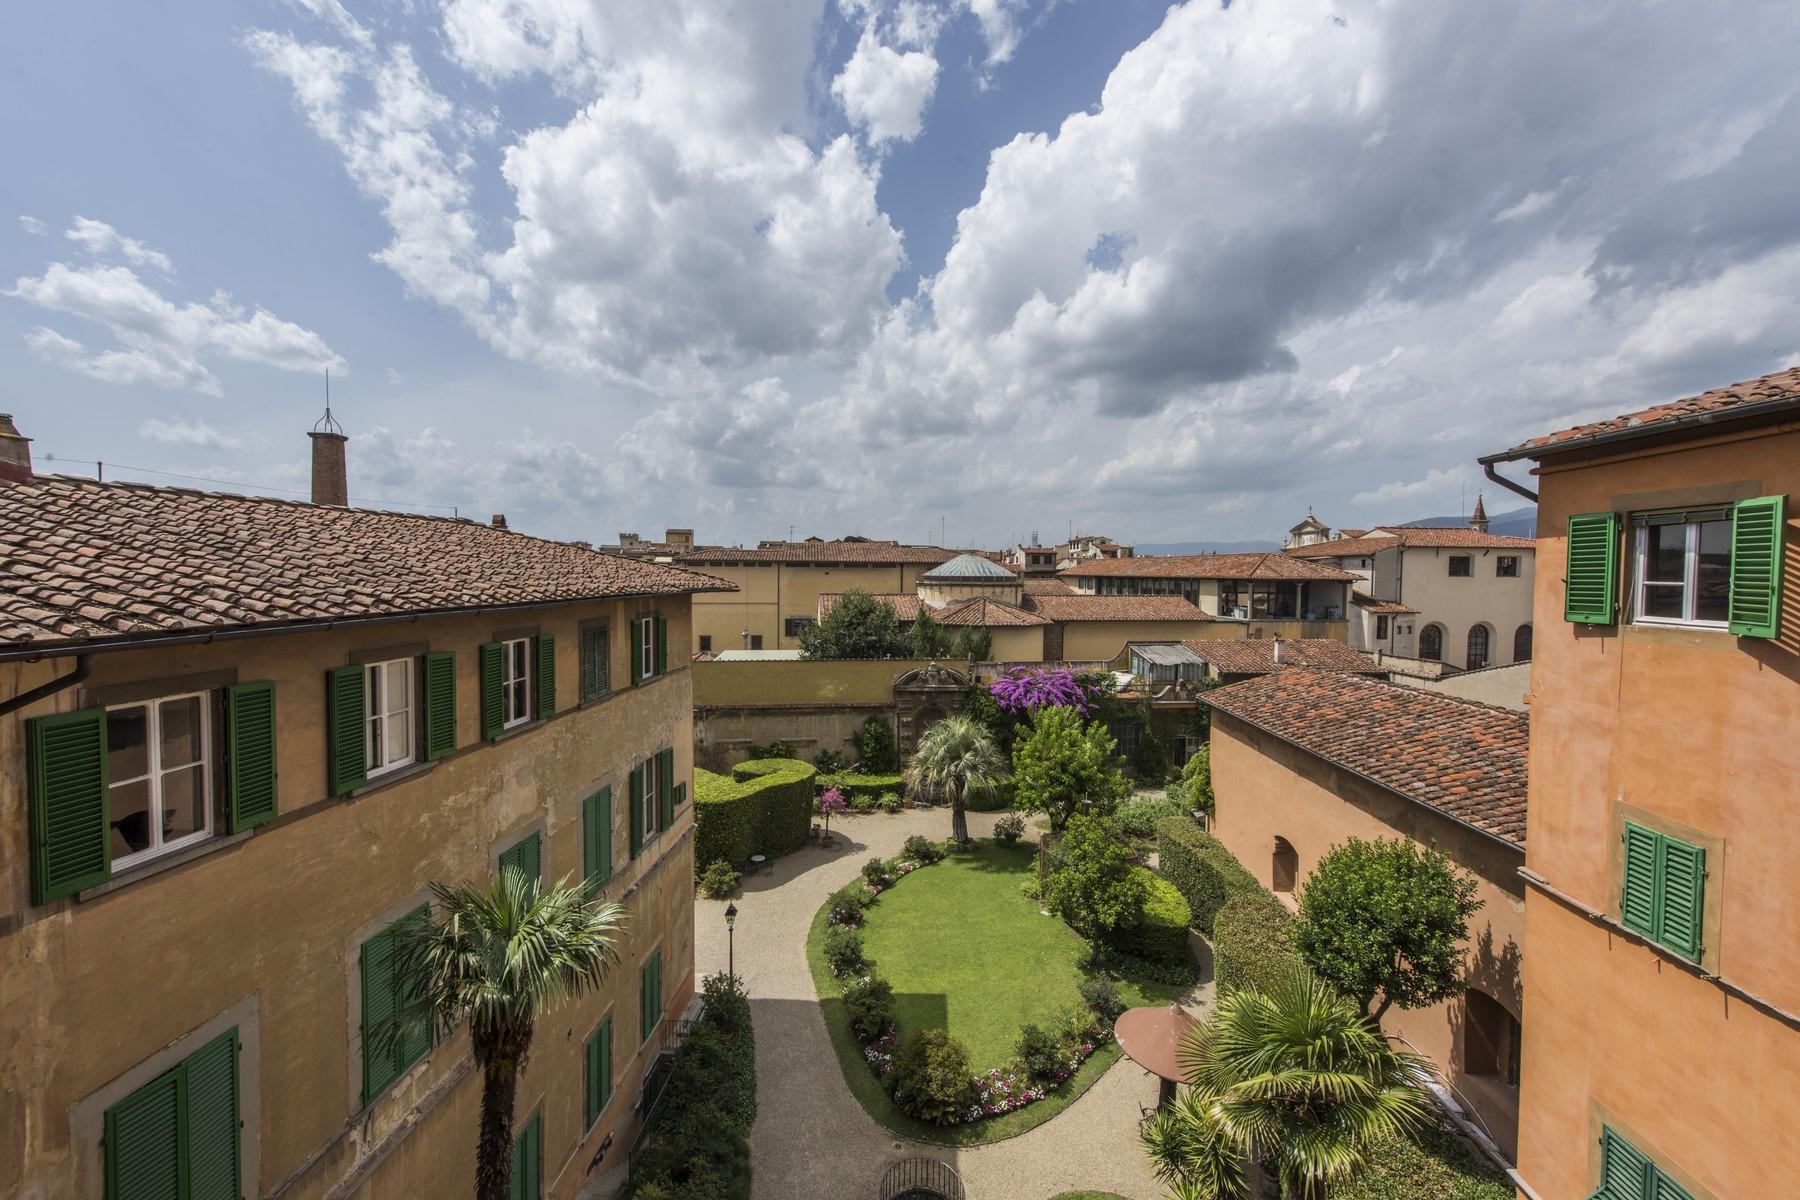 Magnificent 520sqm penthouse in a historic Florentine palazzo. - 2